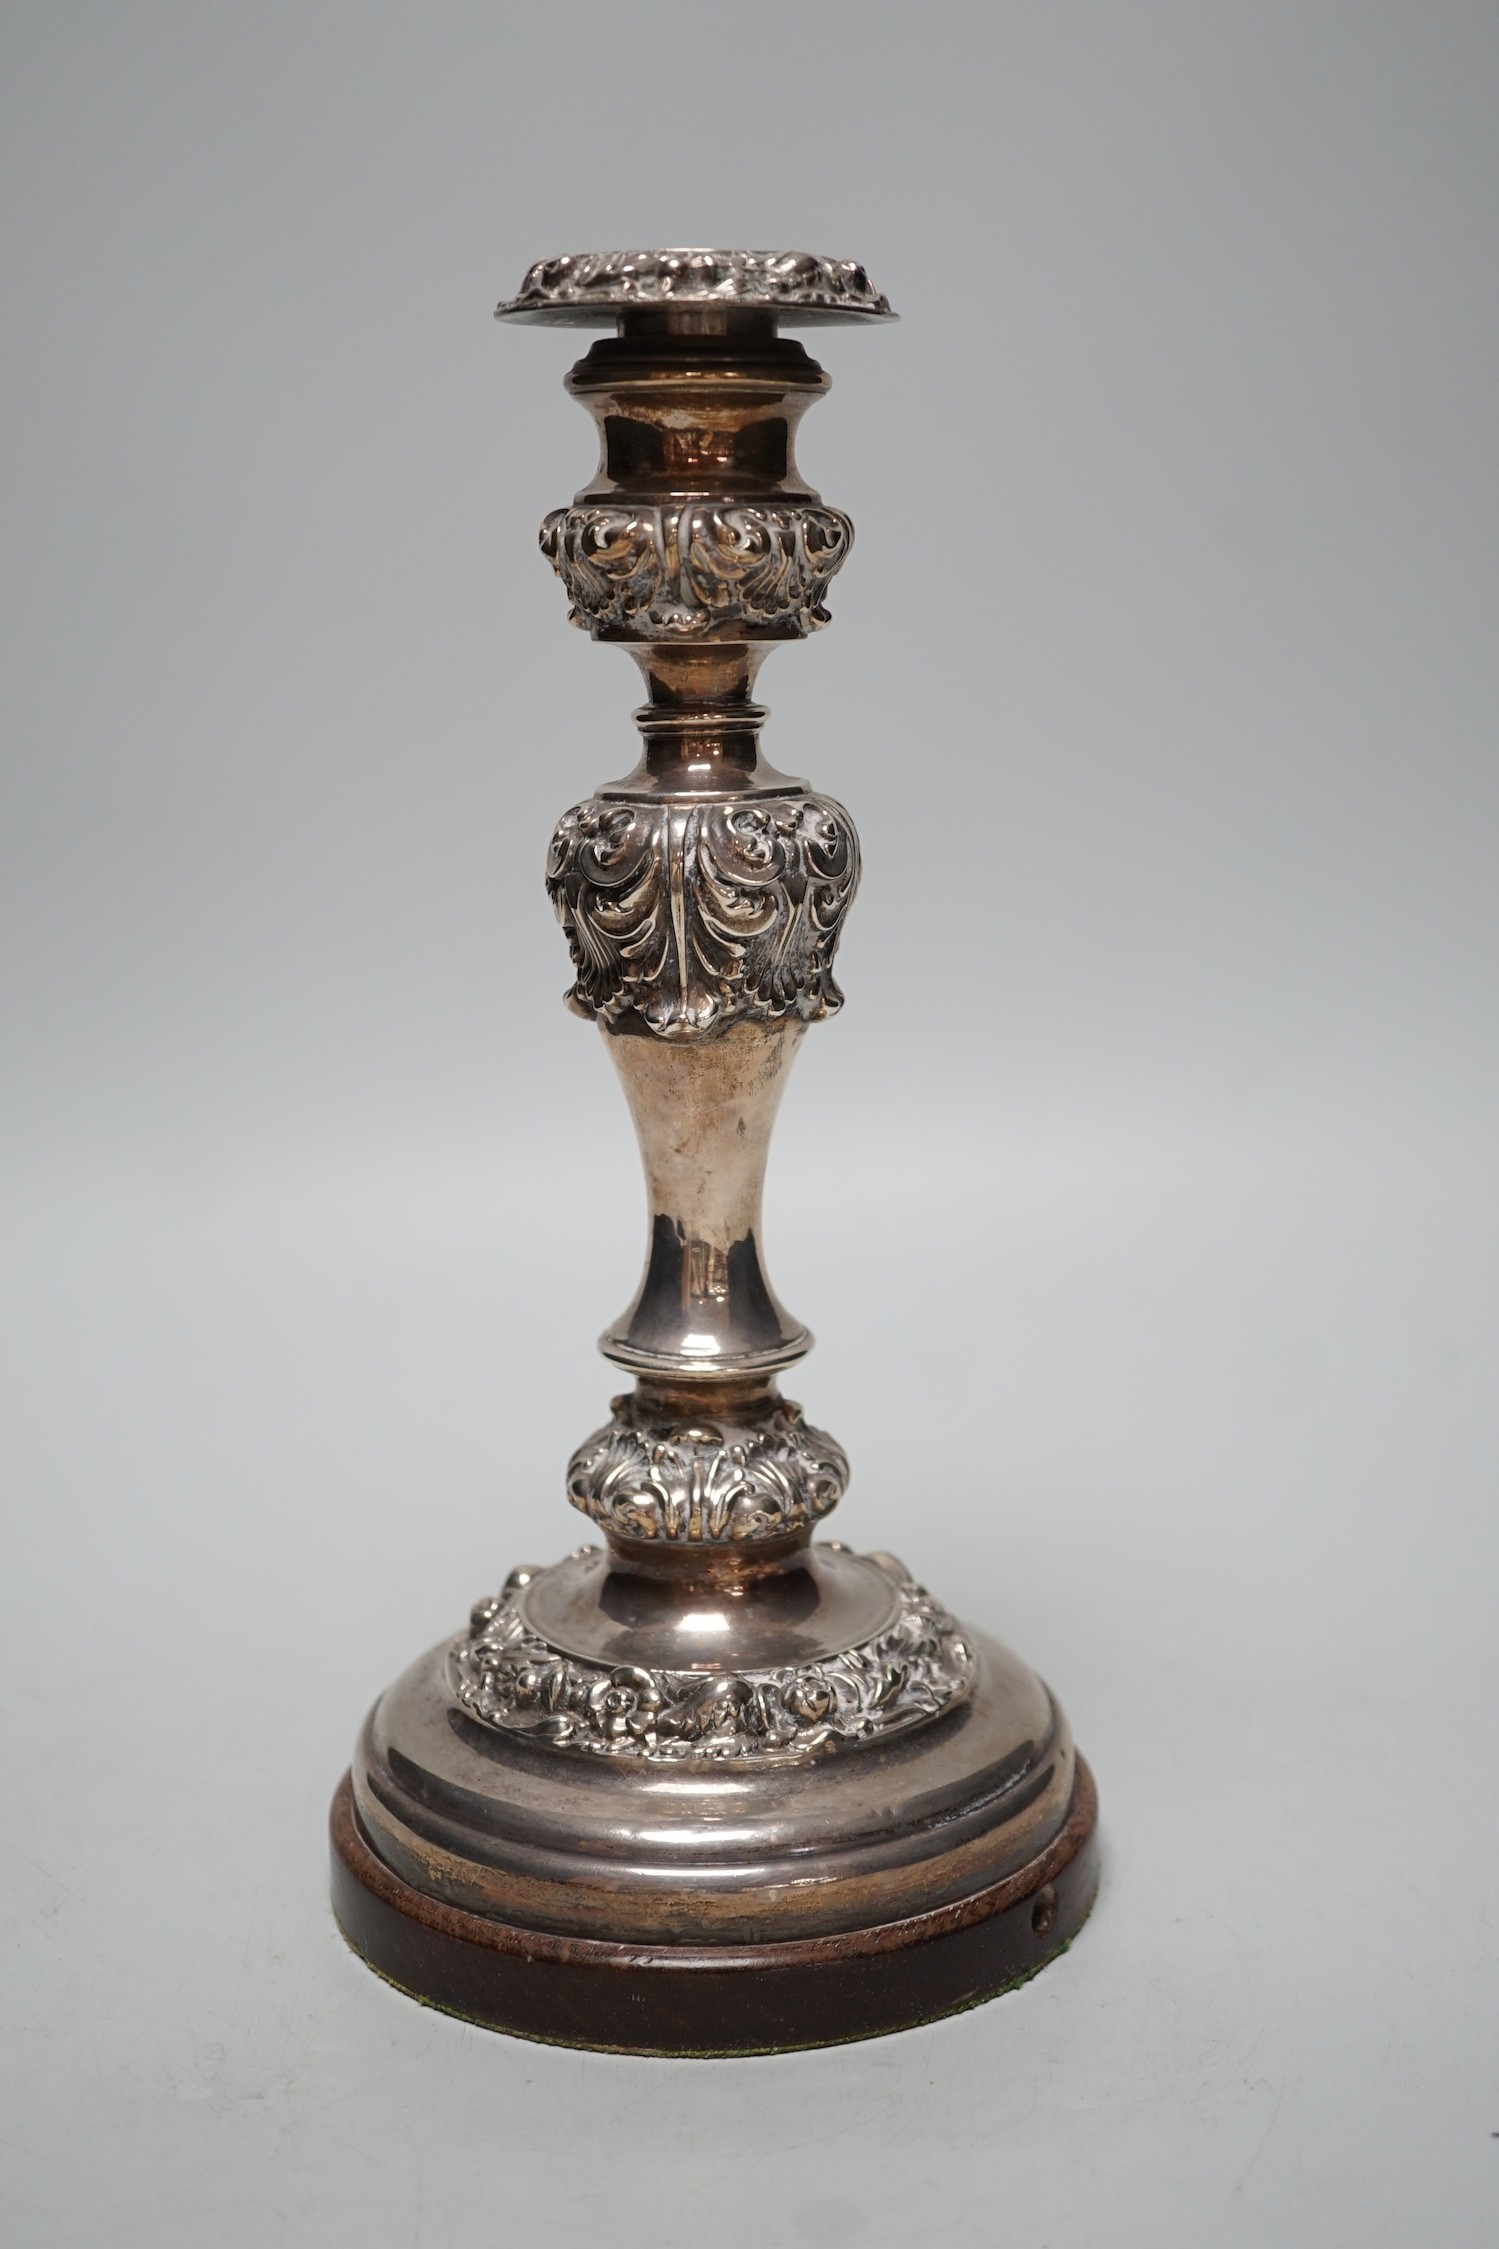 A George IV silver candlestick, Thomas Blagden & Co, Sheffield, 1822, now mounted on a later wooden base, with drill hole for electricity??, overall height 26.9cm.